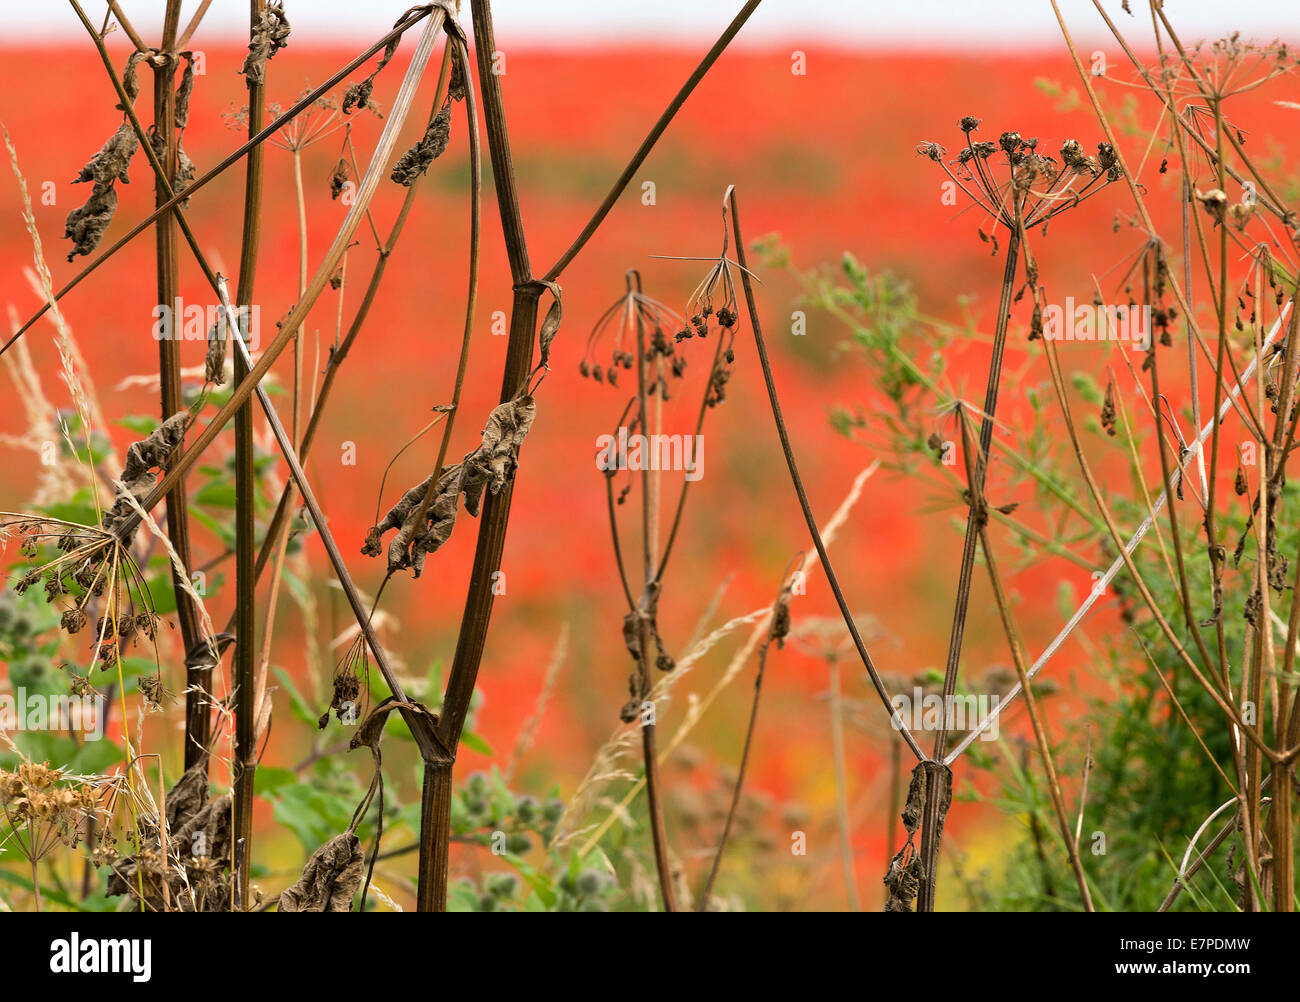 Closeup of Roadside Weeds with a Field of Bright Red Common Poppies in the Background near Fairburn Ings Yorkshire England UK Stock Photo